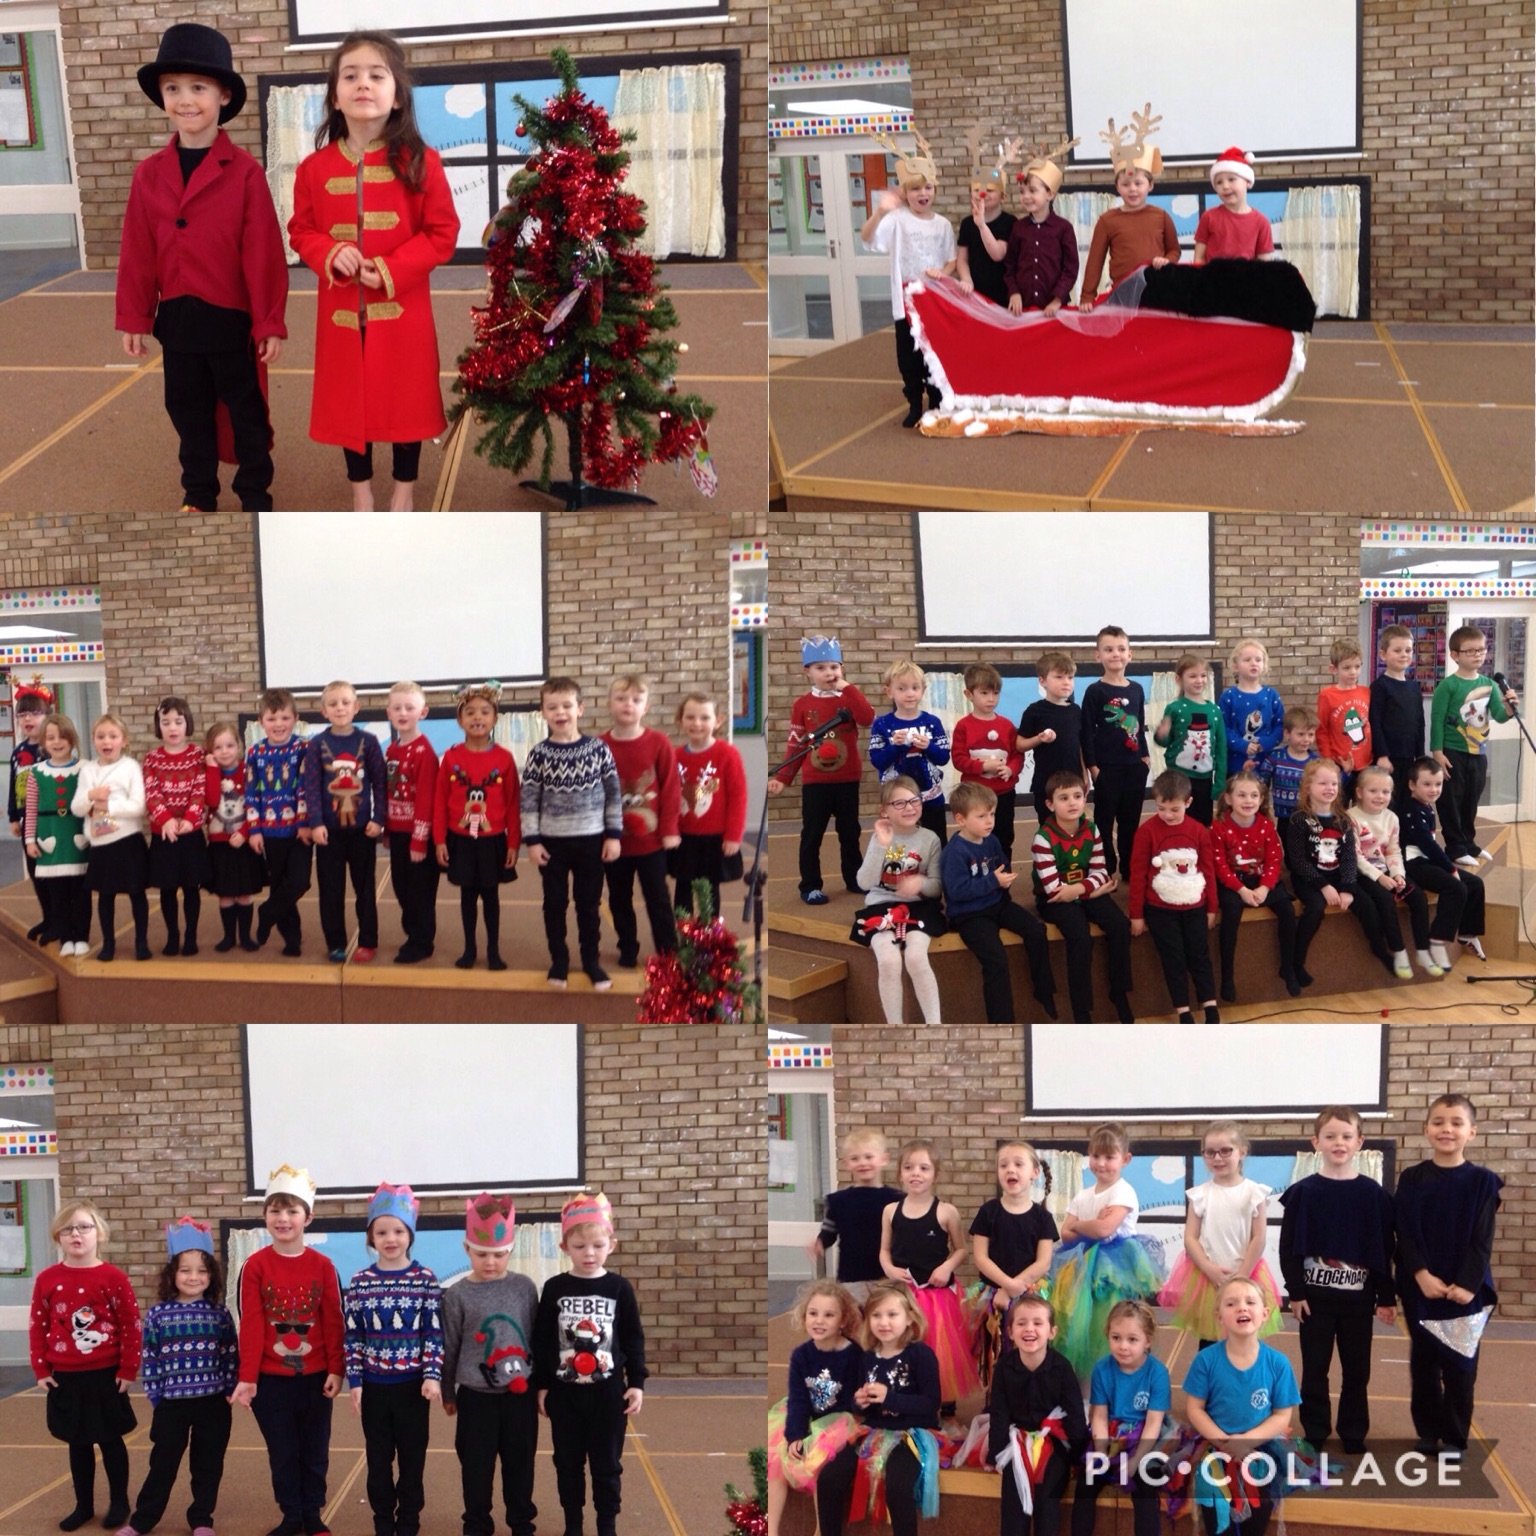 Year One 'The Greatest Christmas Show'